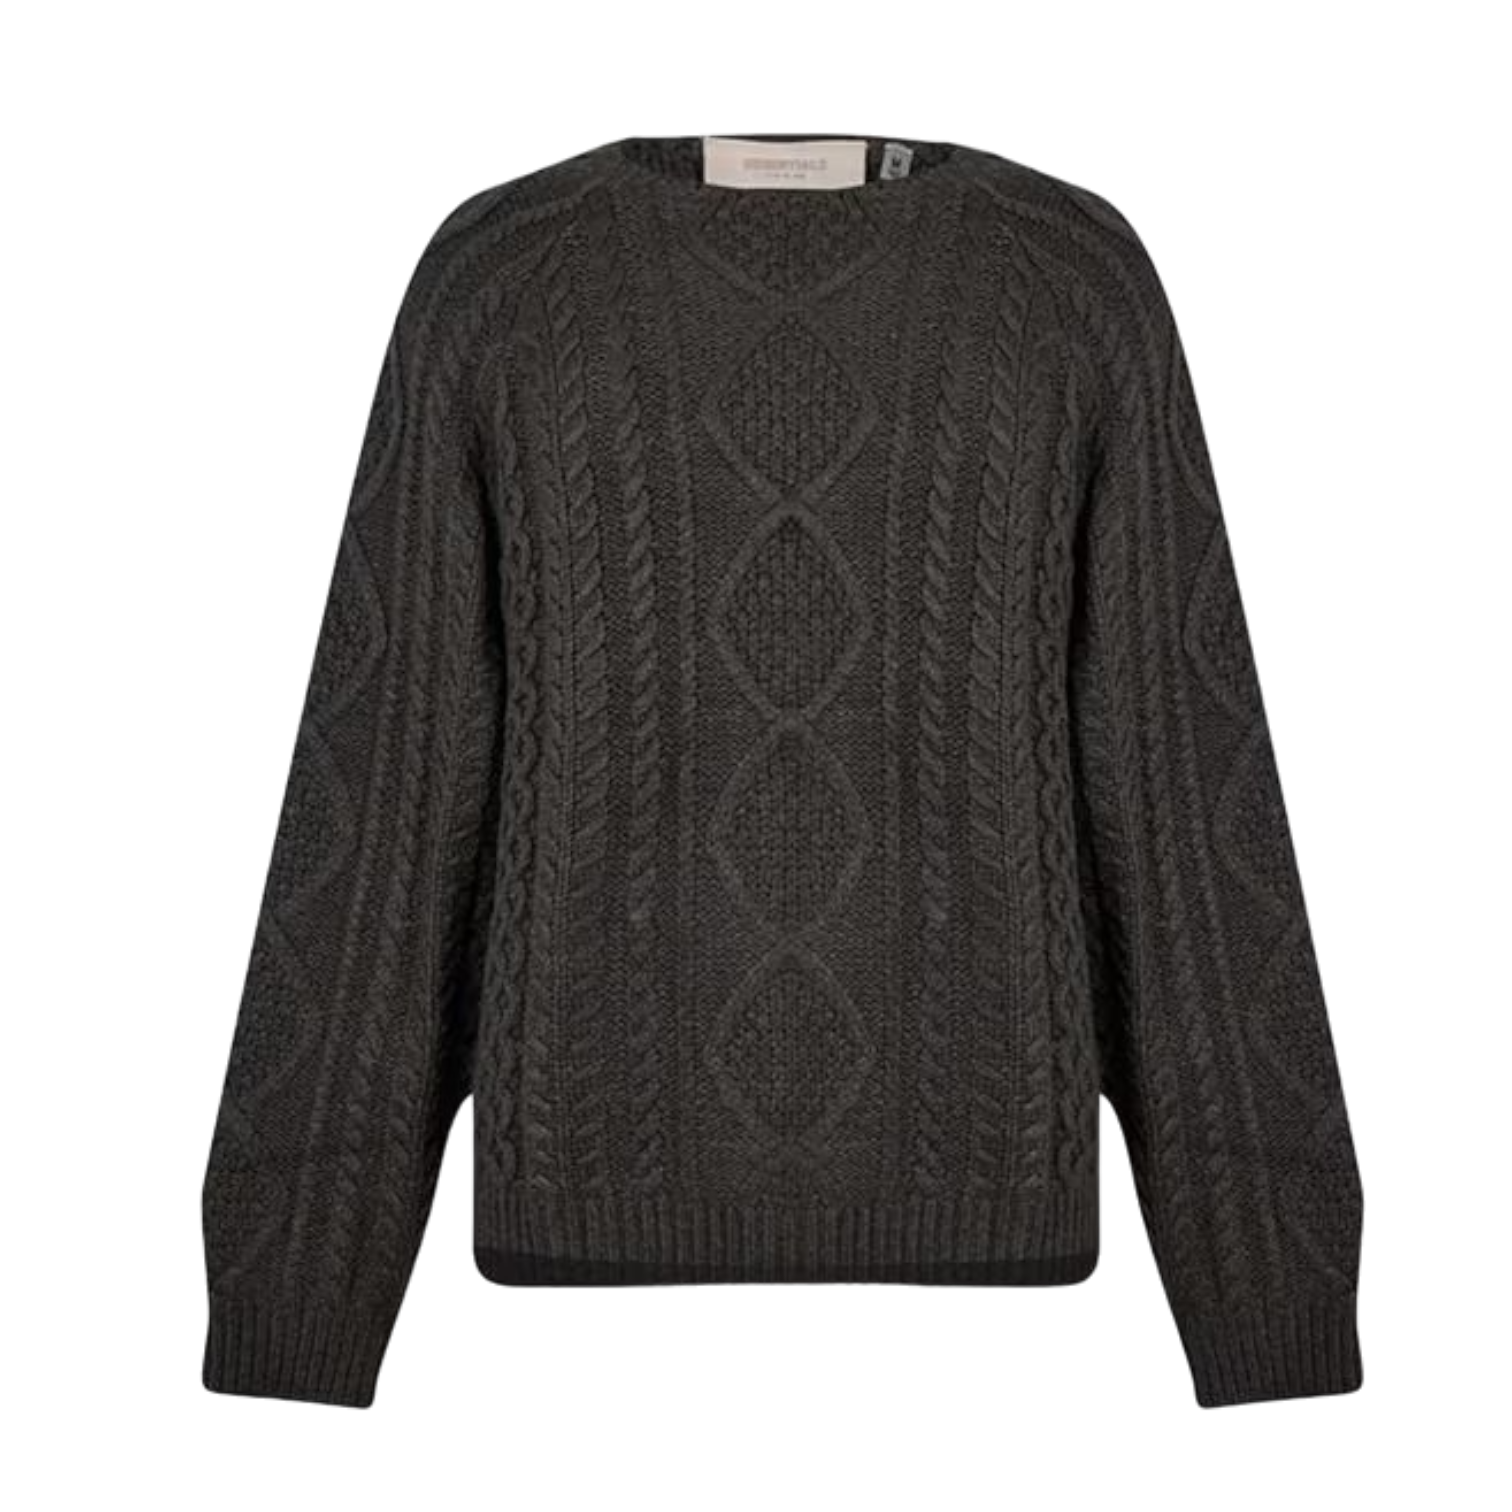 LUXURY HUB FEAR OF GOD ESSENTIALS CABLE KNIT JUMPER